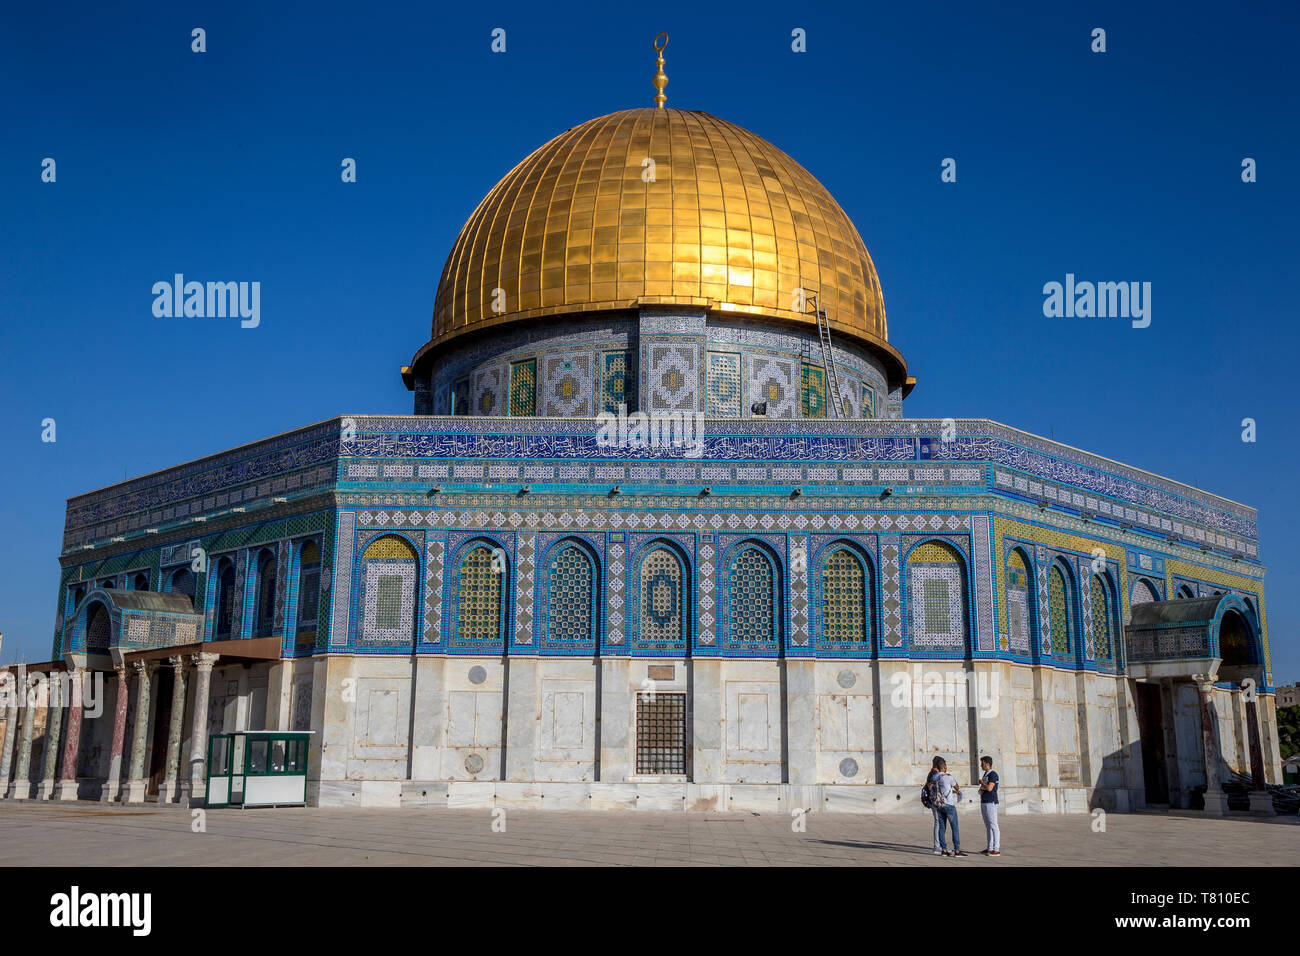 Dome of the Rock, UNESCO World Heritage Site, East Jerusalem, Israel, Middle East Stock Photo